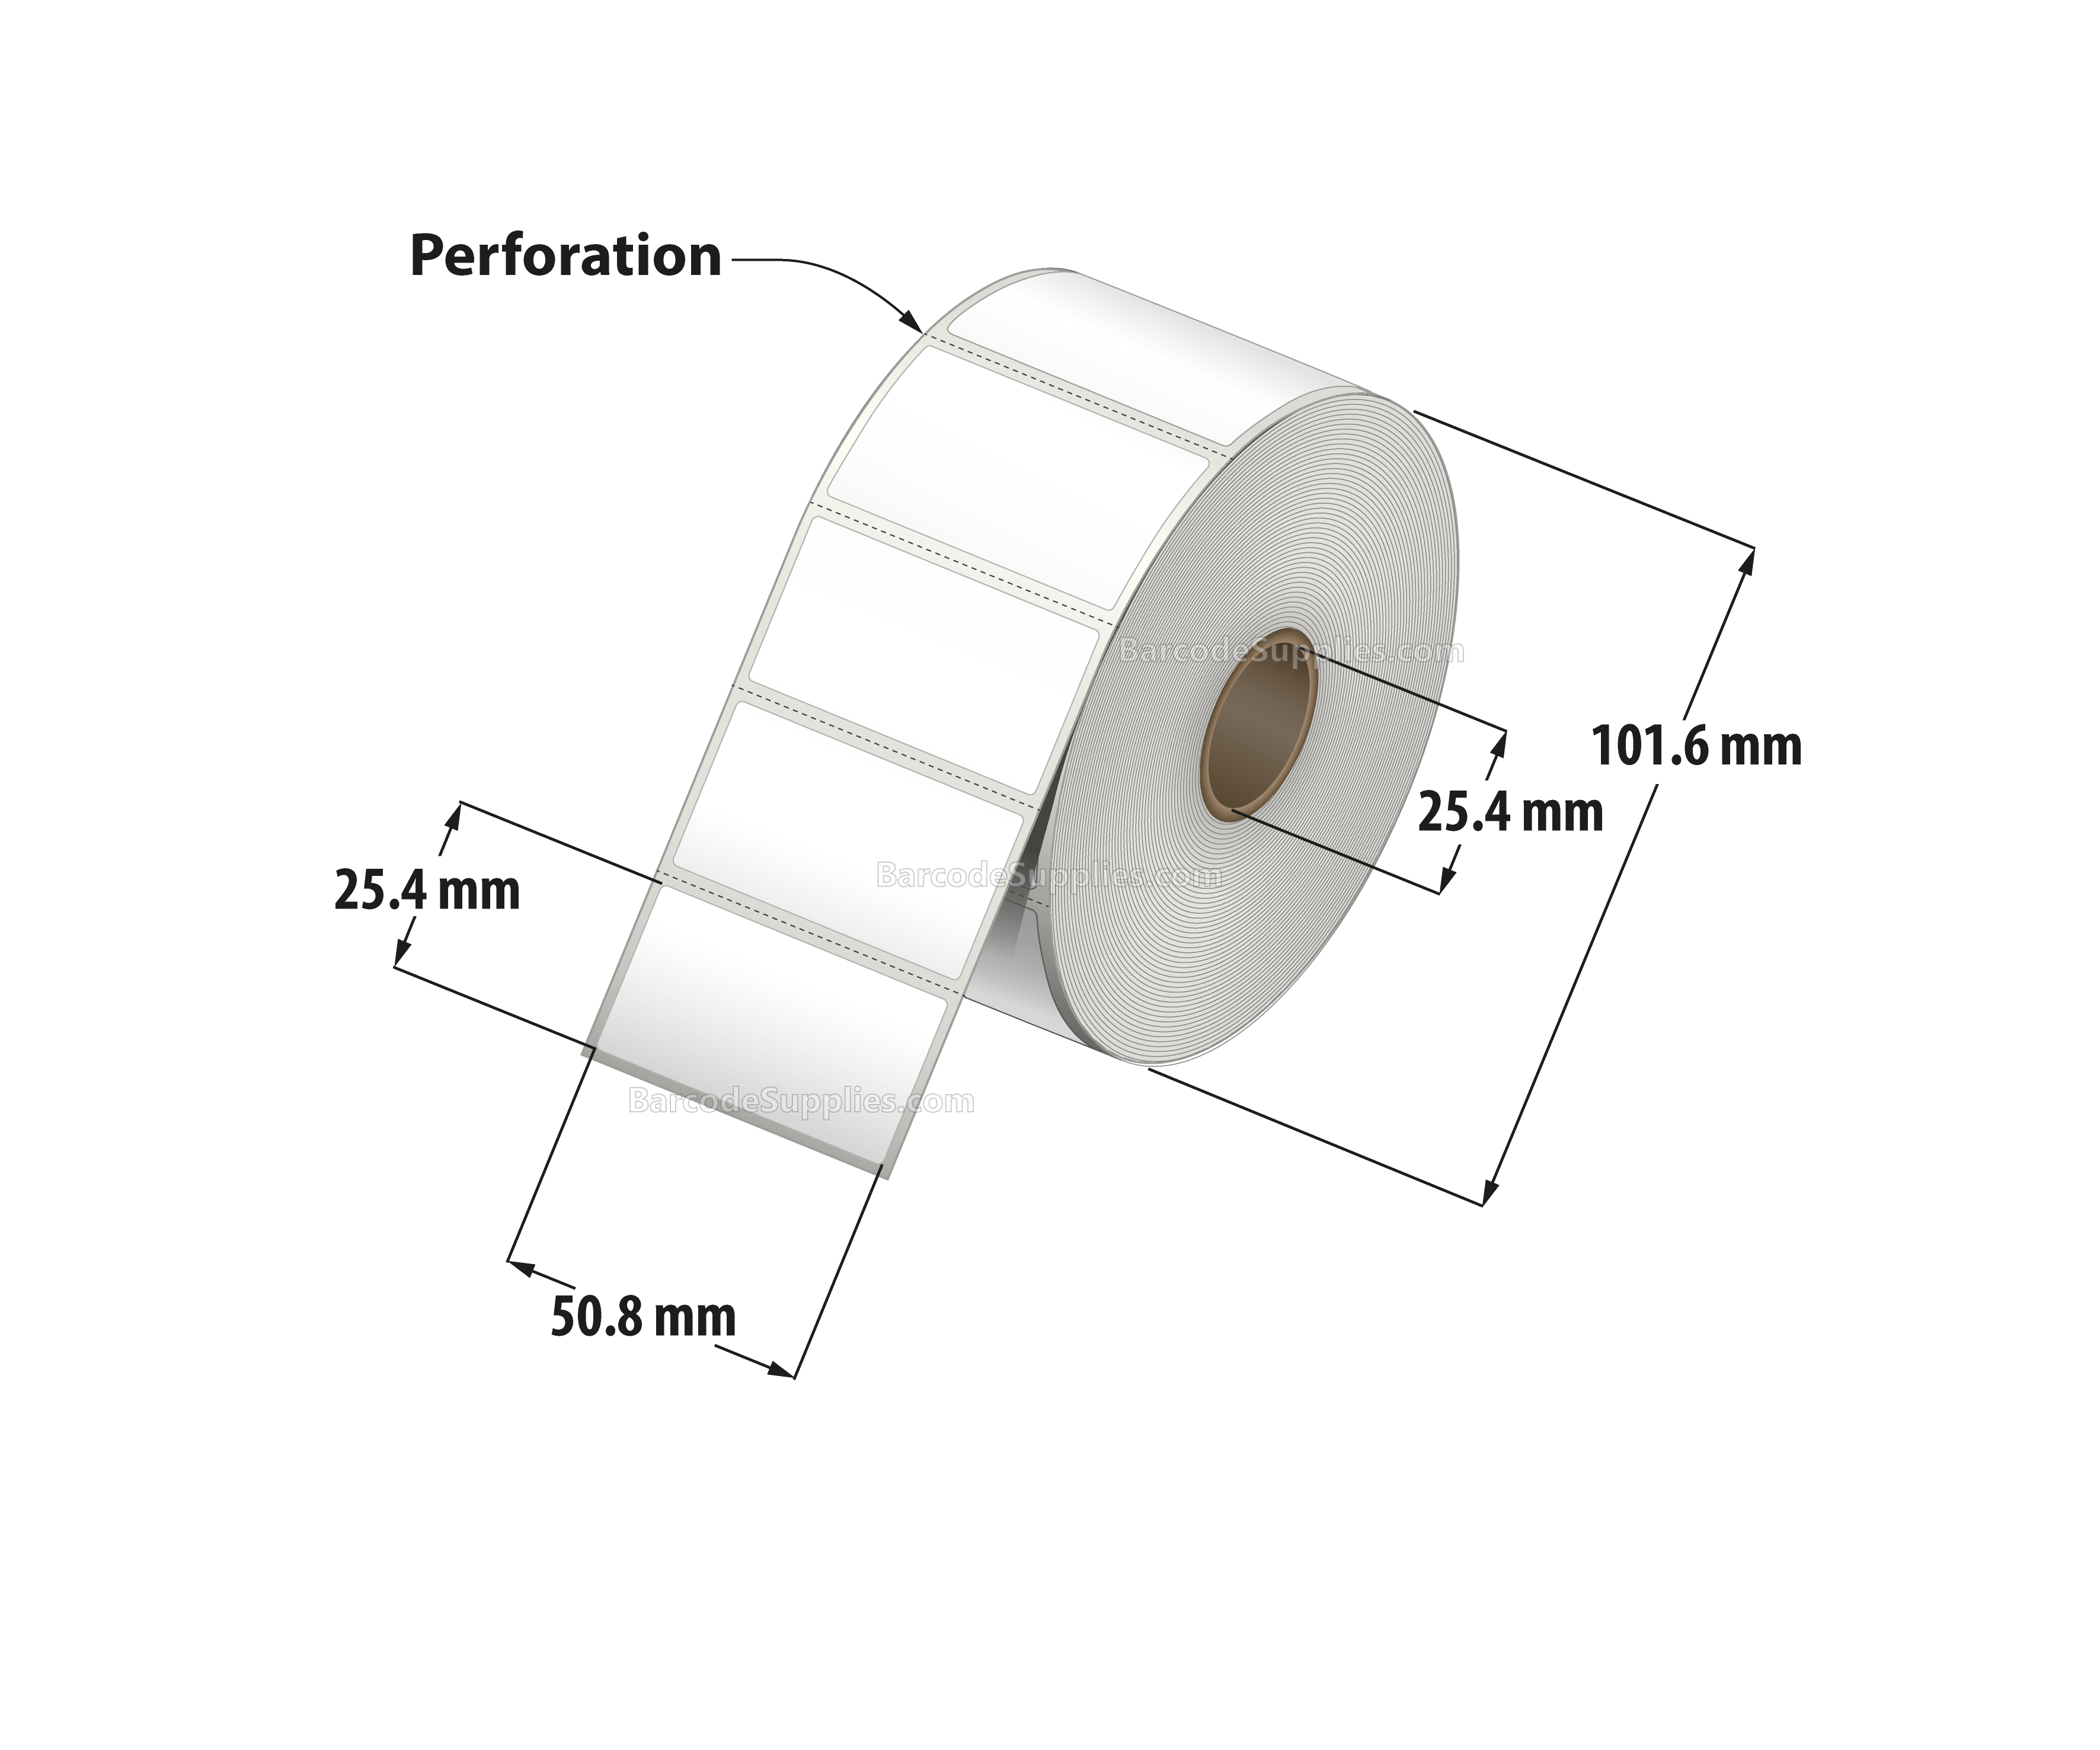 2 x 1 Direct Thermal White Labels With Acrylic Adhesive - Perforated - 1375 Labels Per Roll - Carton Of 12 Rolls - 16500 Labels Total - MPN: RD-2-1-1375-1 - BarcodeSource, Inc.